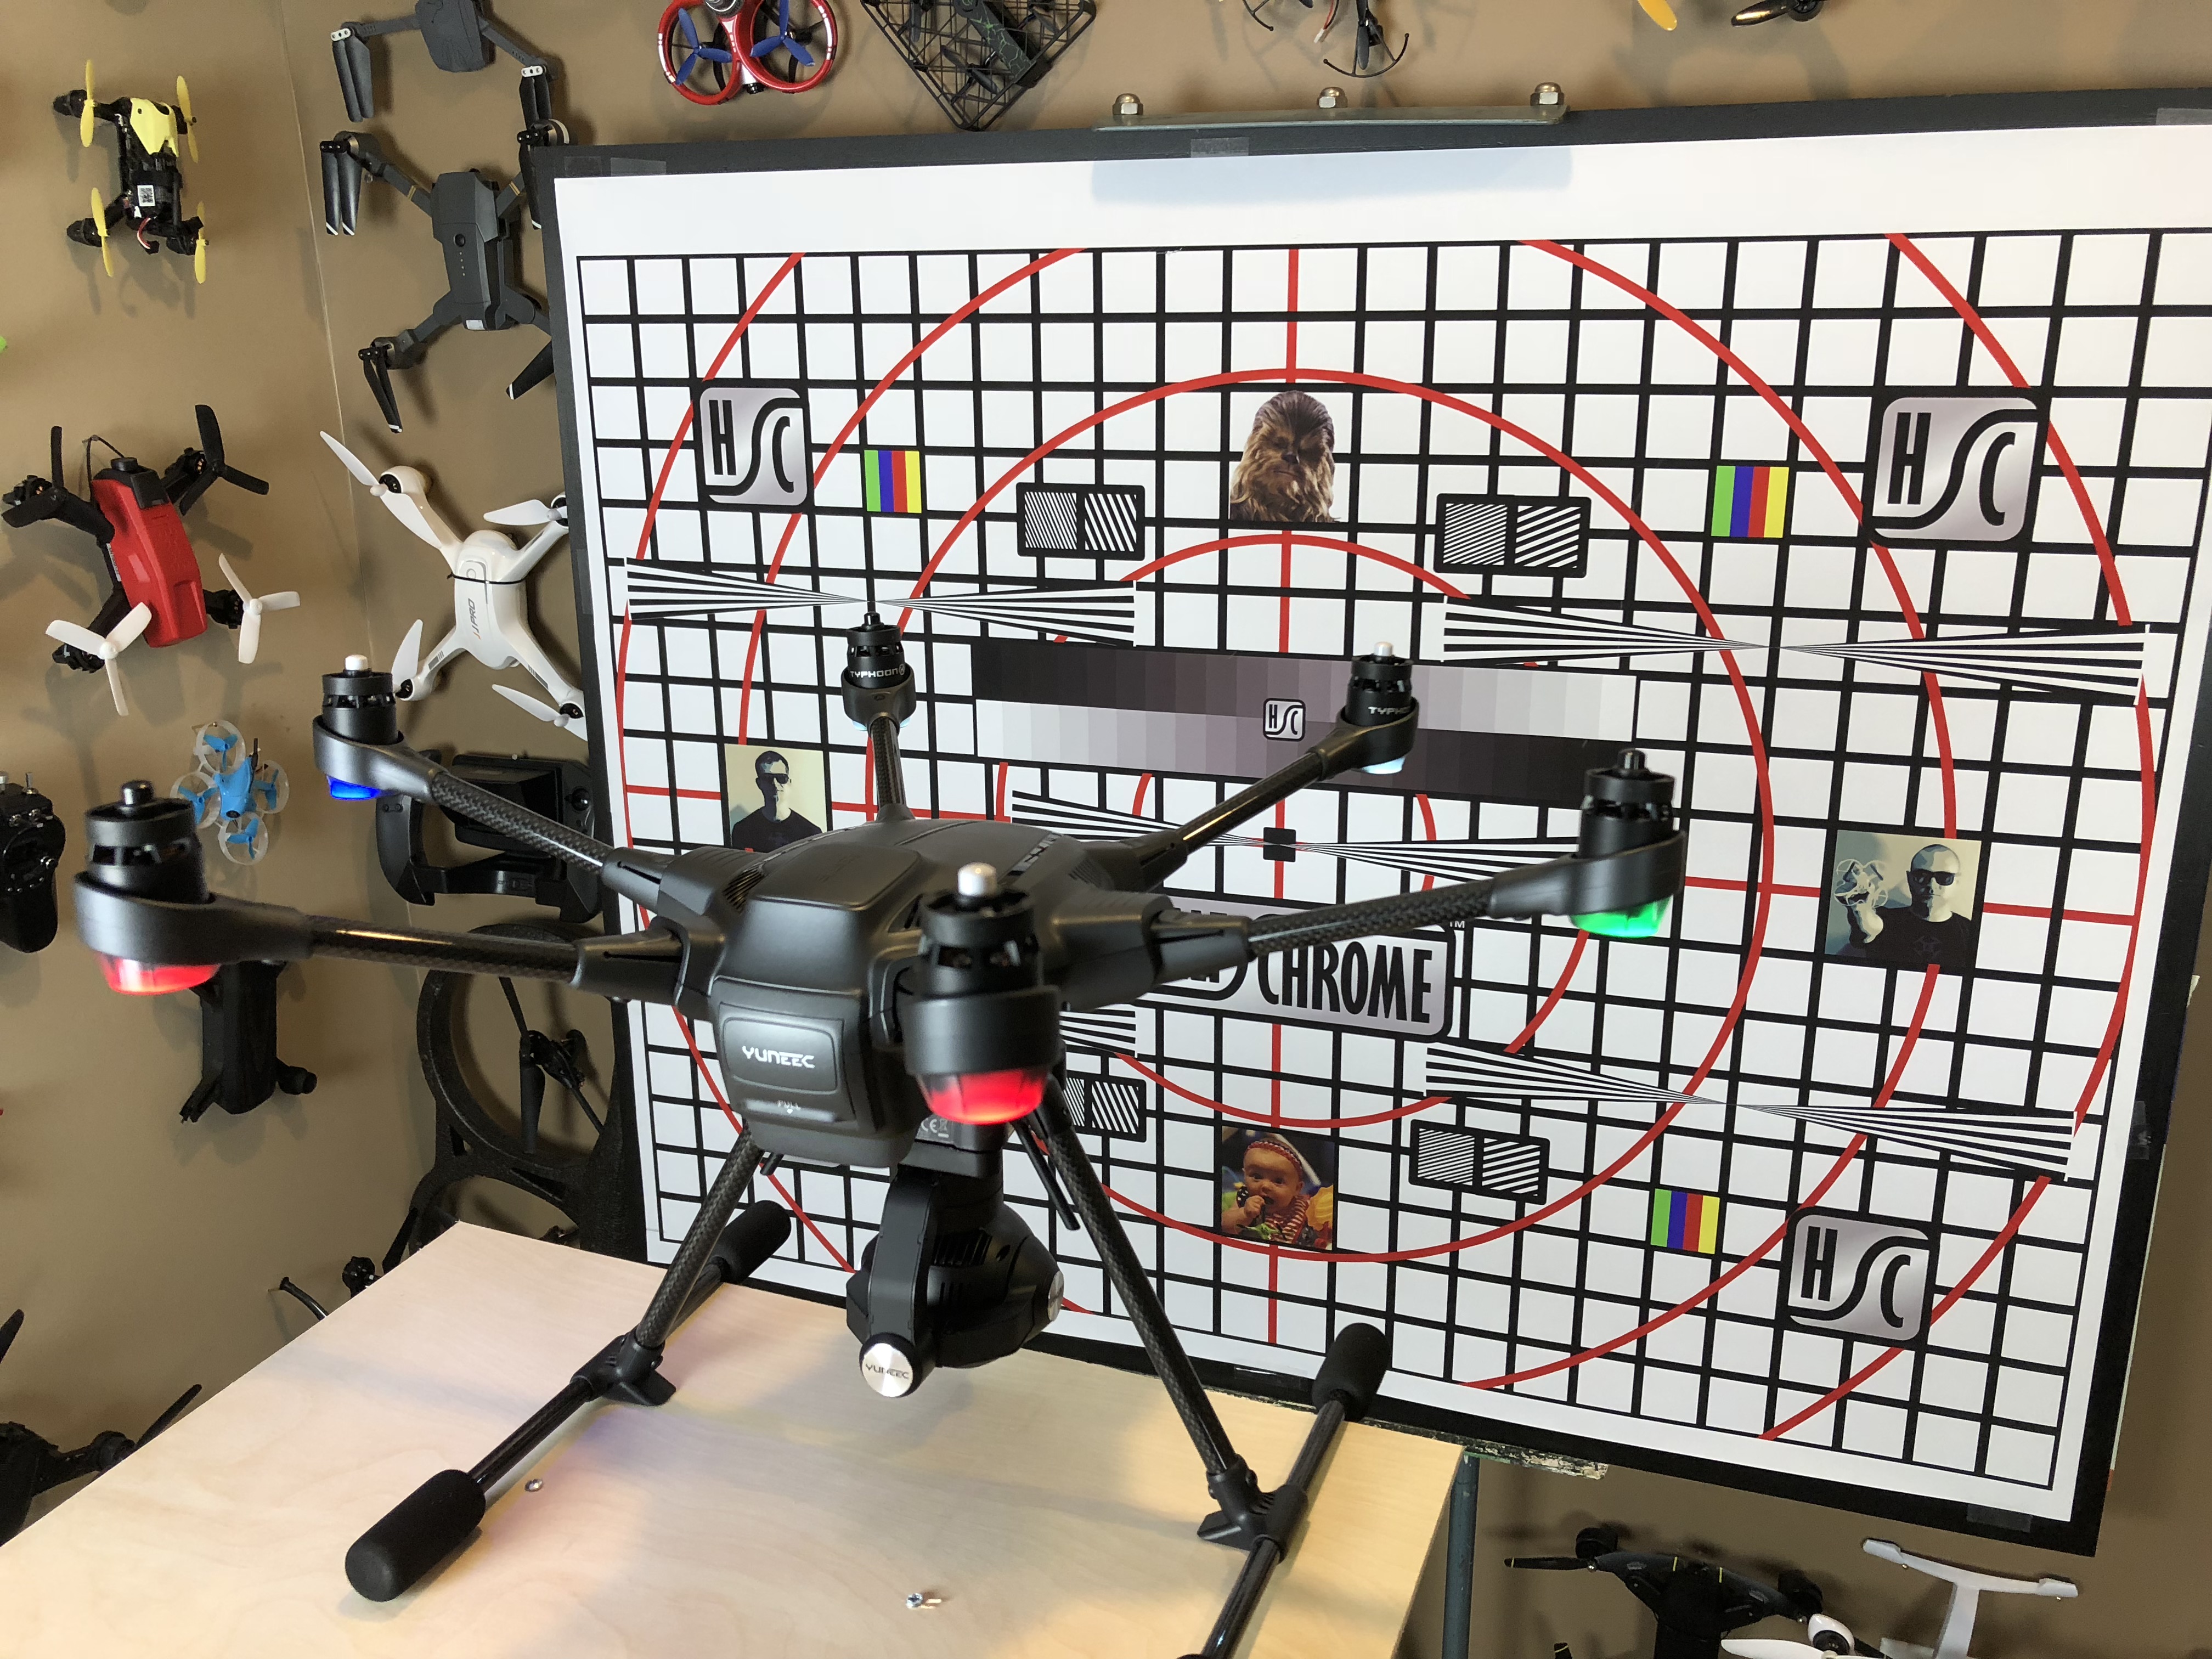 Typhoon H Camera being tested on Half Chrome test target